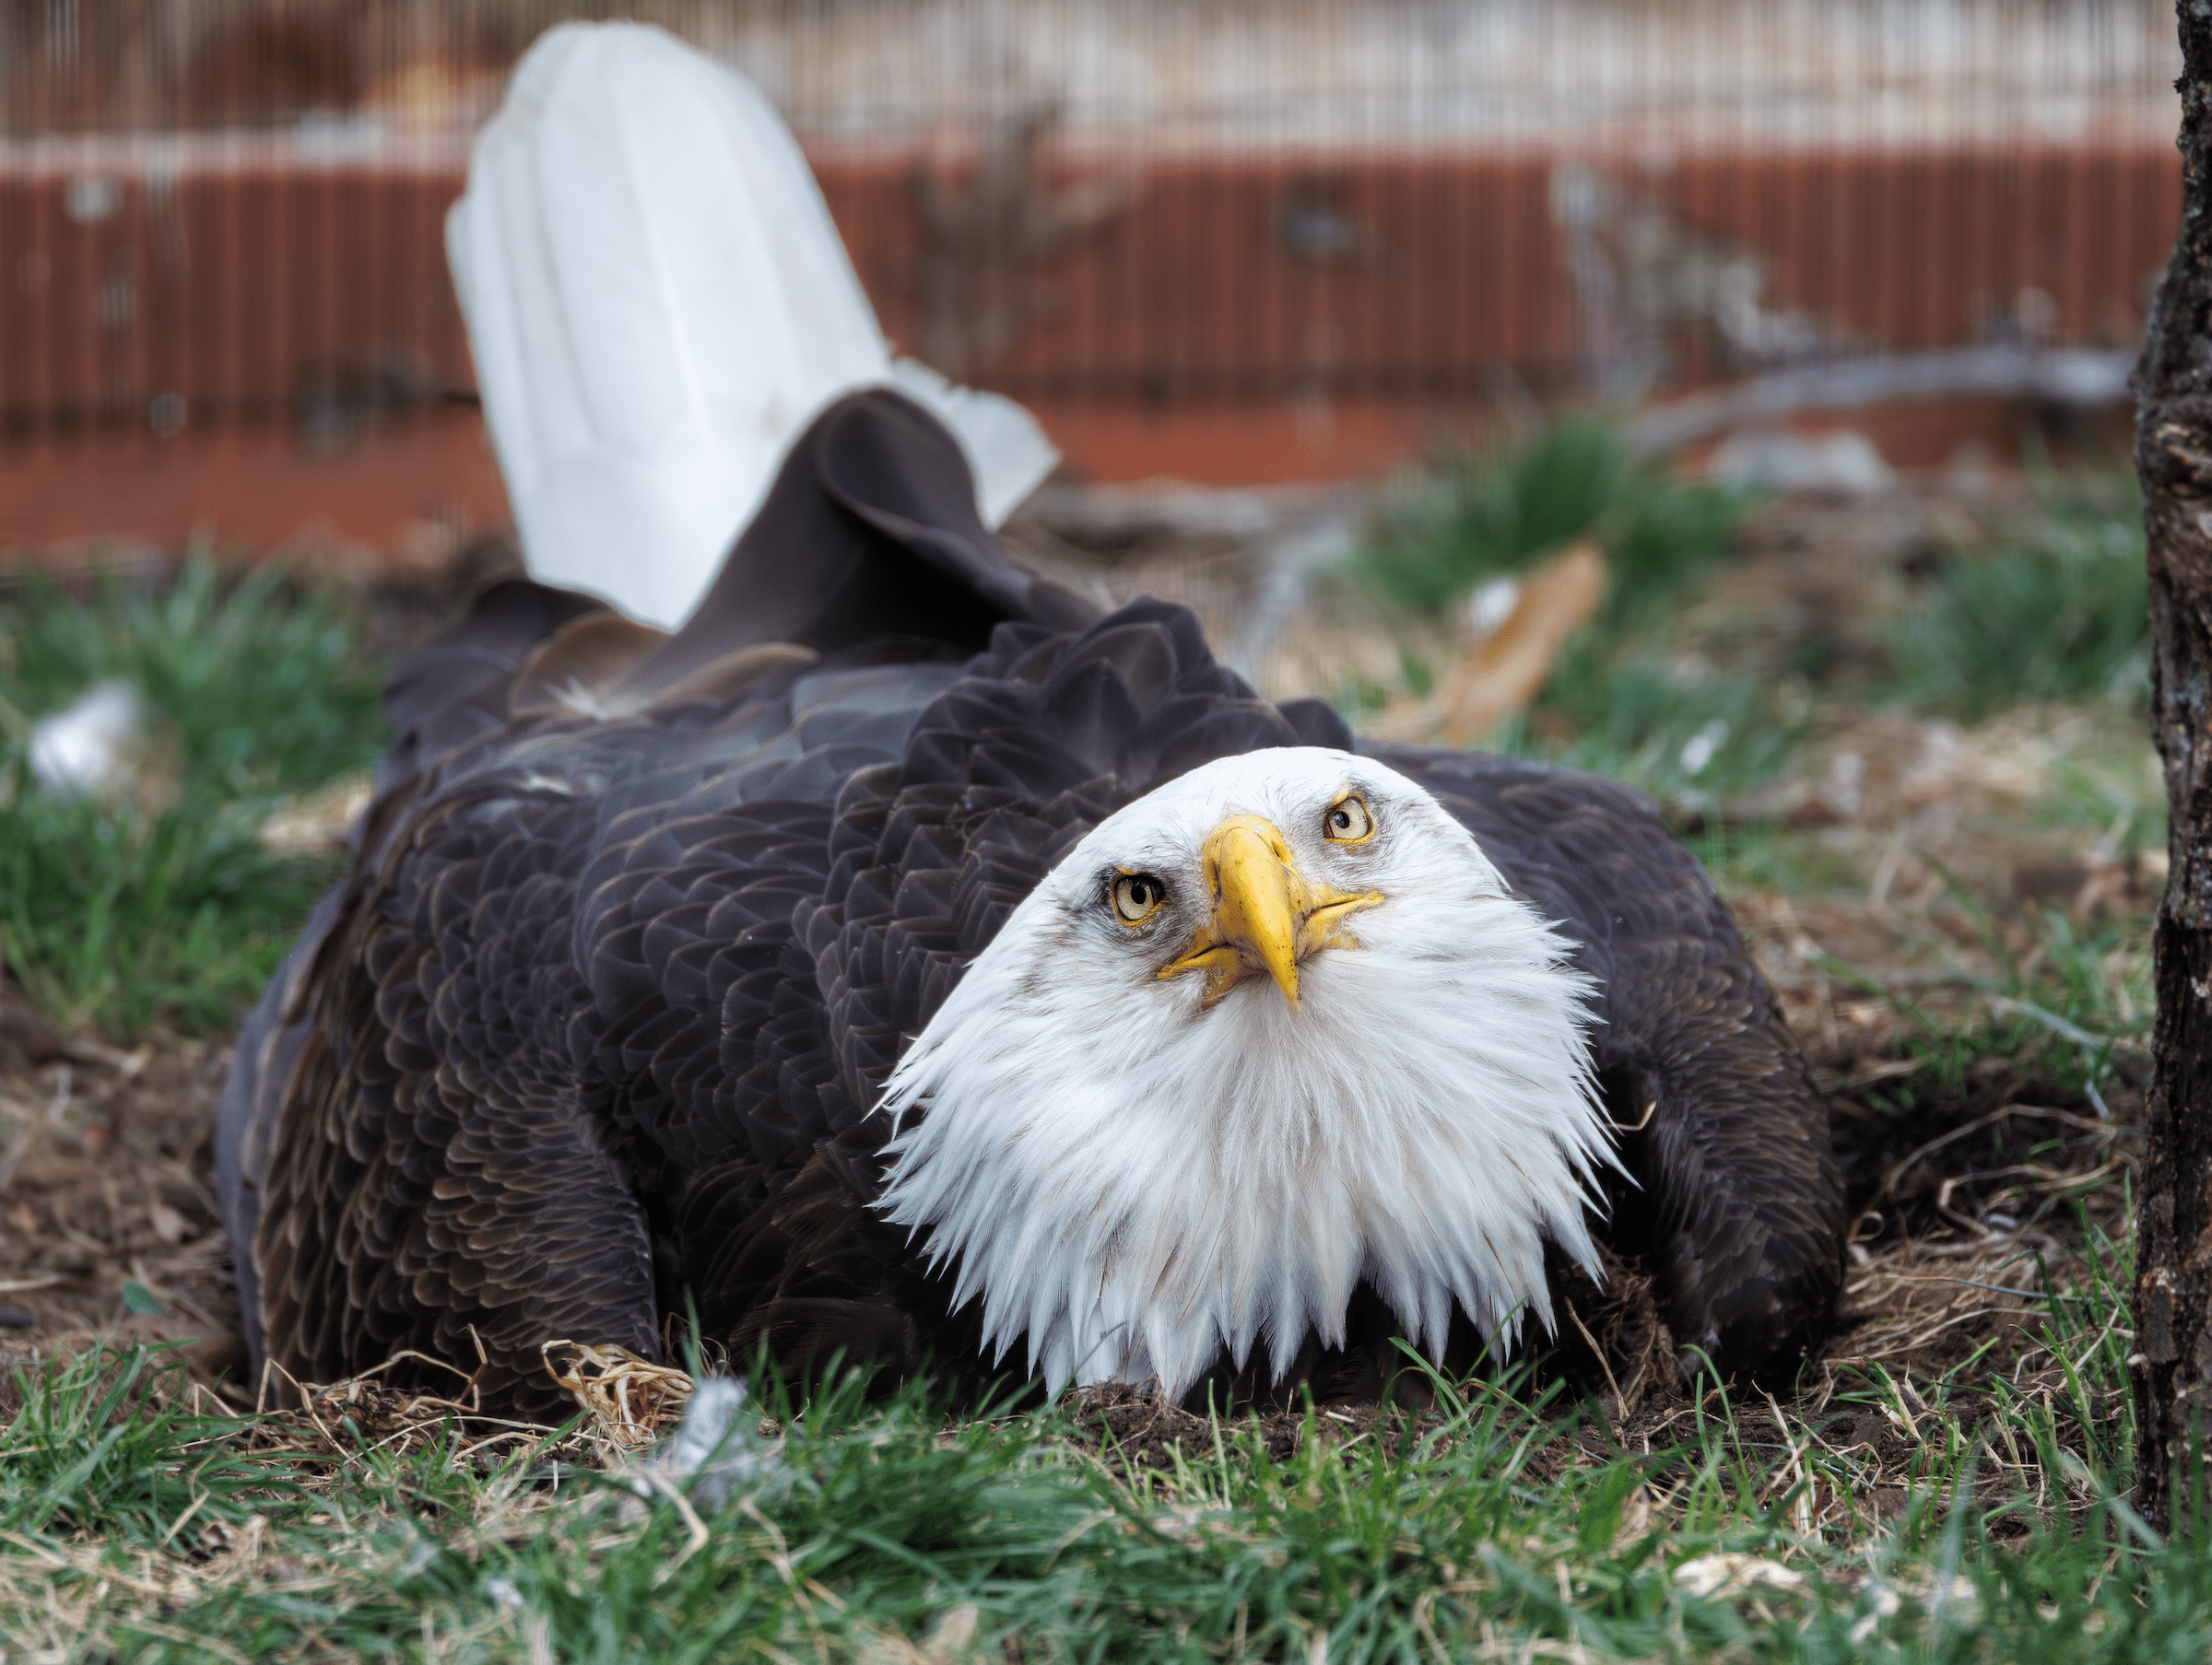 Murphy the bald eagle on his rock.